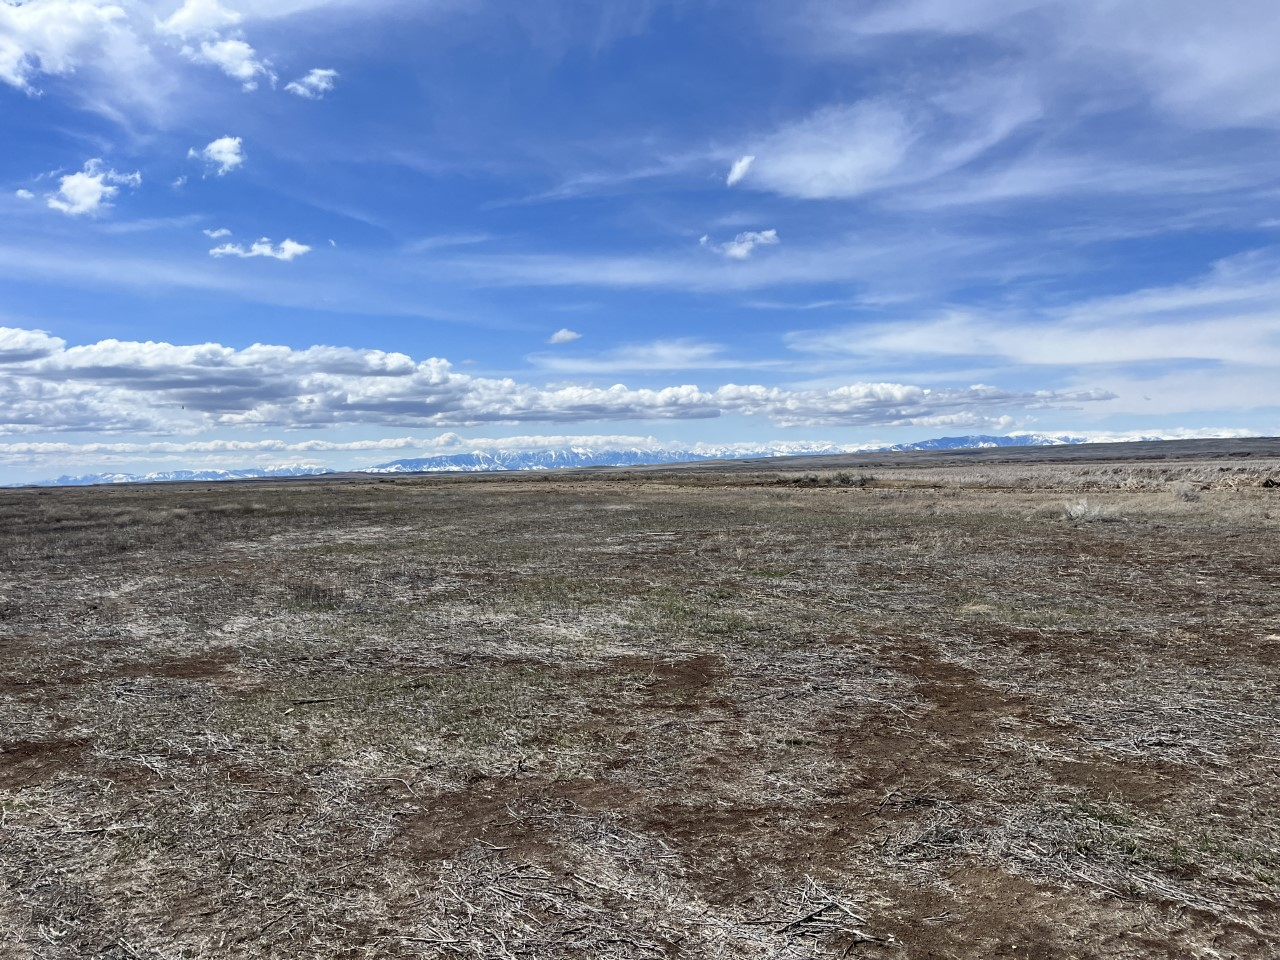 an expansive view of Camas NWR showing vast open fields and blue sky with whispy clouds